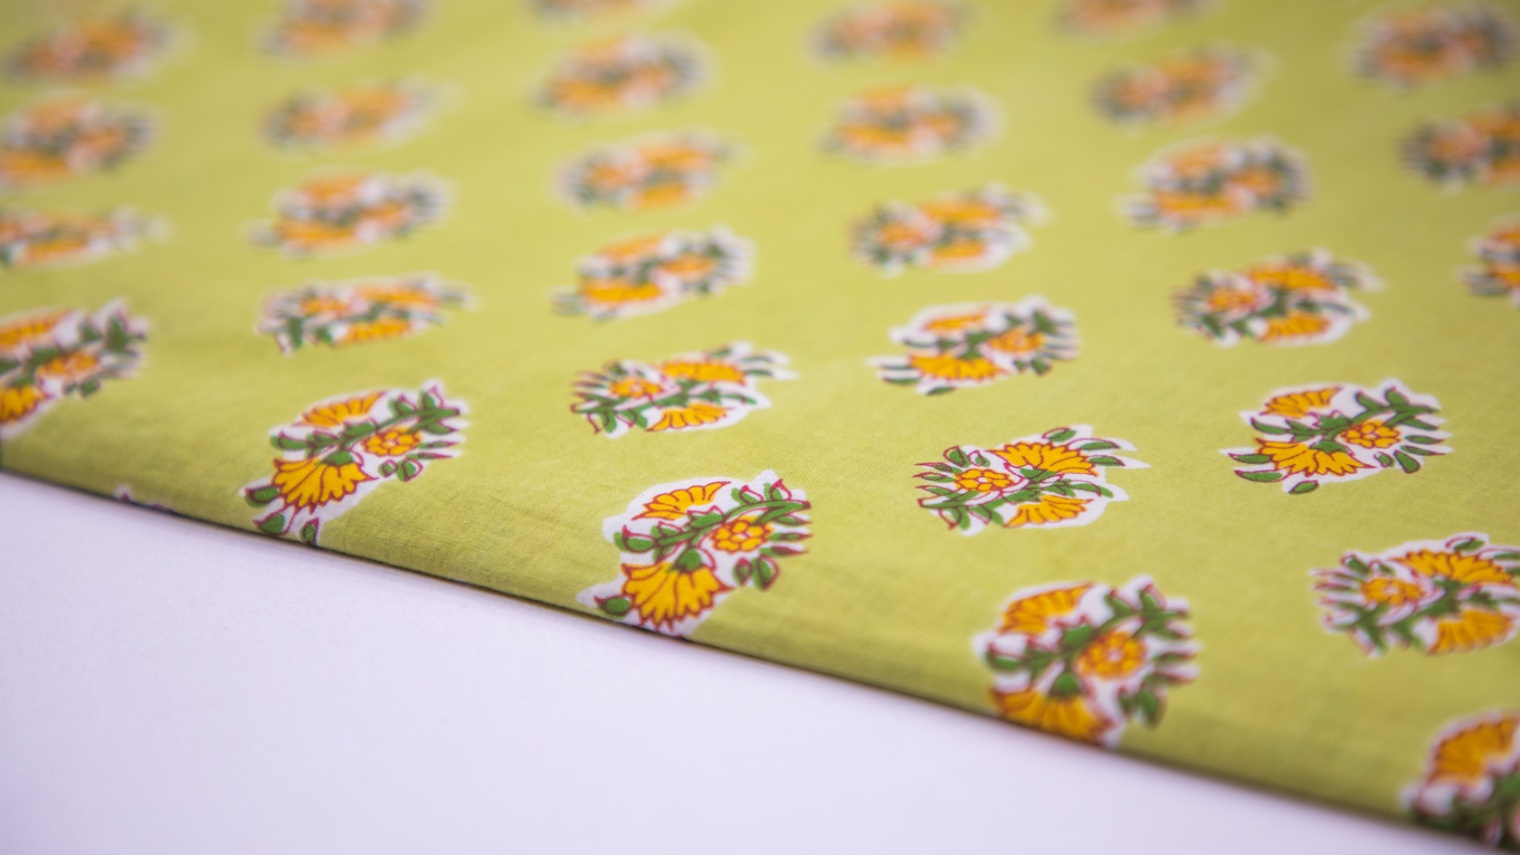 PASTEL OLIVE GREEN COLOR COTTON SCREEN PRINT FLOWER MOTIF FABRIC - 4497